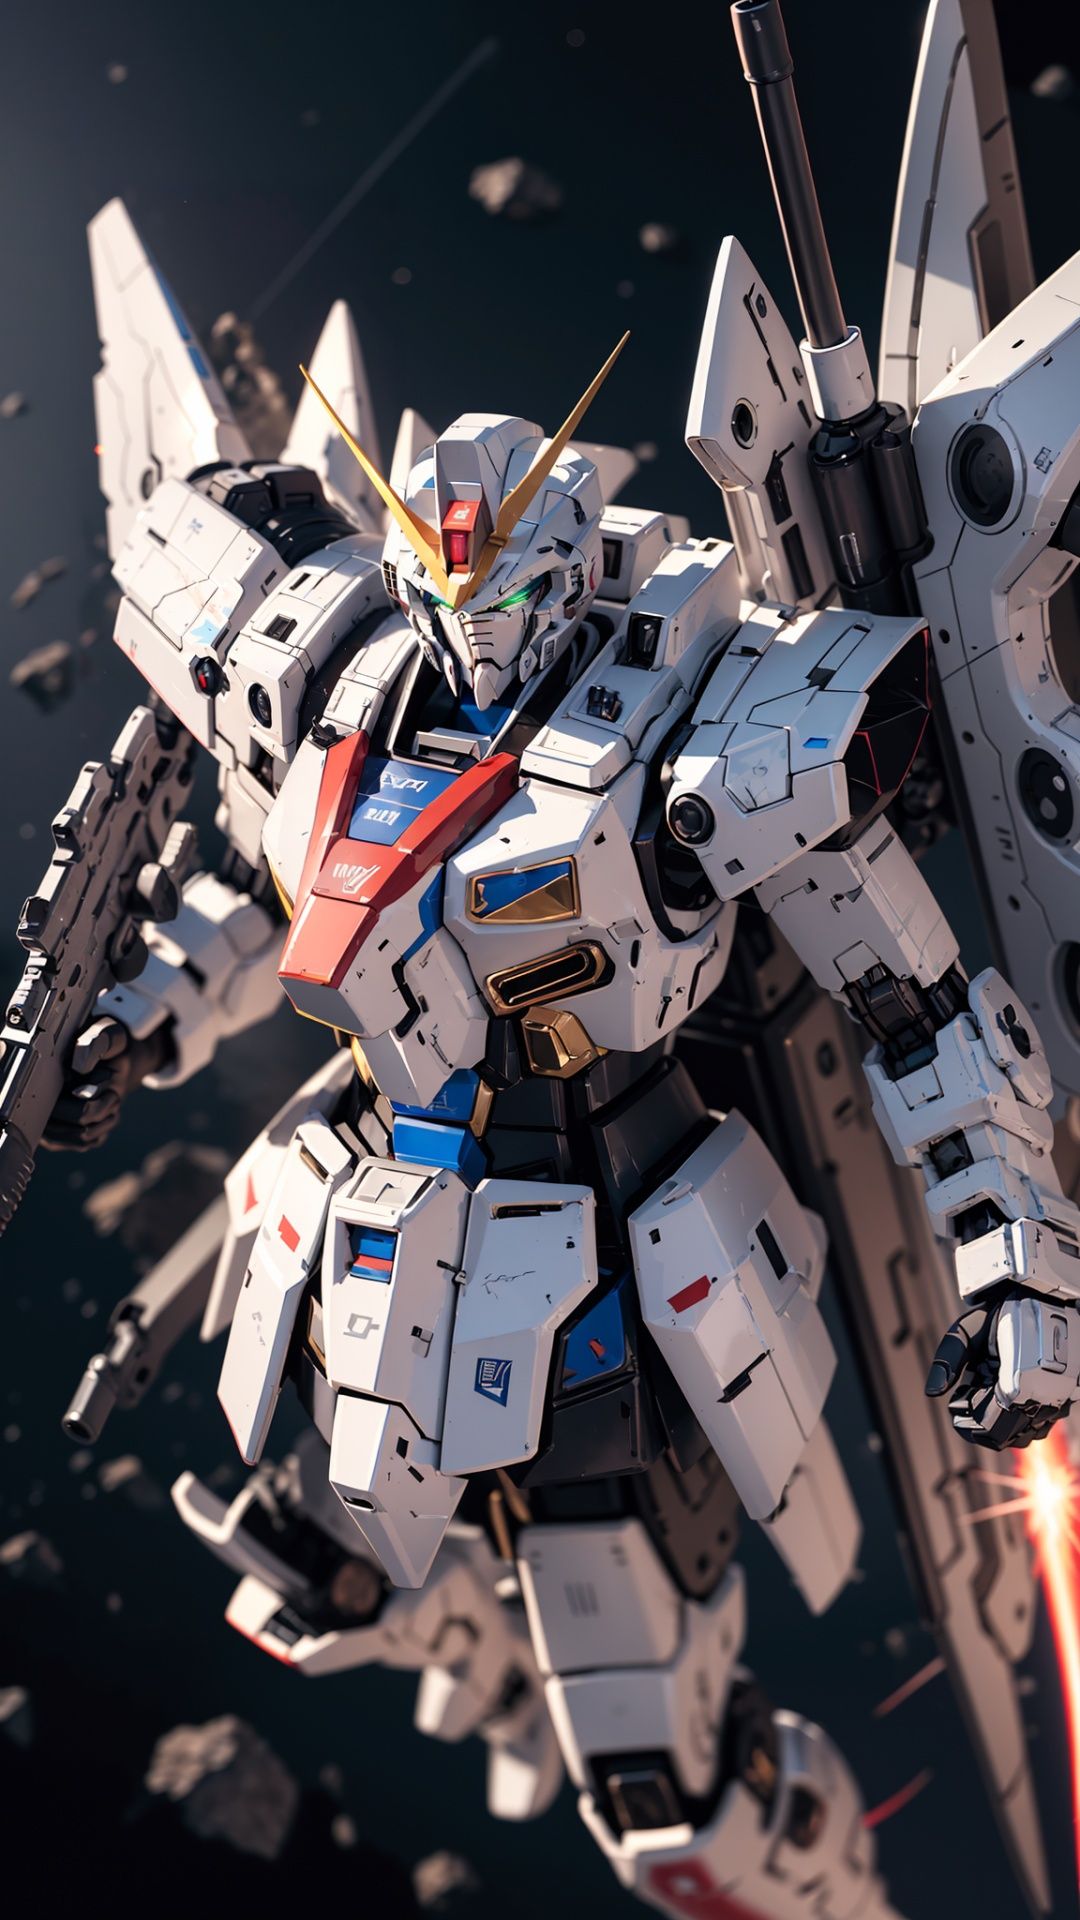 Hyperrealistic art BJ_Gundam,solo,holding,green_eyes,weapon,sky,holding_weapon,gun,no_humans,glowing,robot,holding_gun,mecha,glowing_eyes,flying,science_fiction,shield,space,v-fin,energy_gun,mobile_suit,beam_rifle,cinematic lighting,strong contrast,high level of detail,Best quality,masterpiece,White background,. Extremely high-resolution details,photographic,realism pushed to extreme,fine texture,incredibly lifelike,<lora:Gundam_Mecha_v5.2:0.6>, . Extremely high-resolution details, photographic, realism pushed to extreme, fine texture, incredibly lifelike